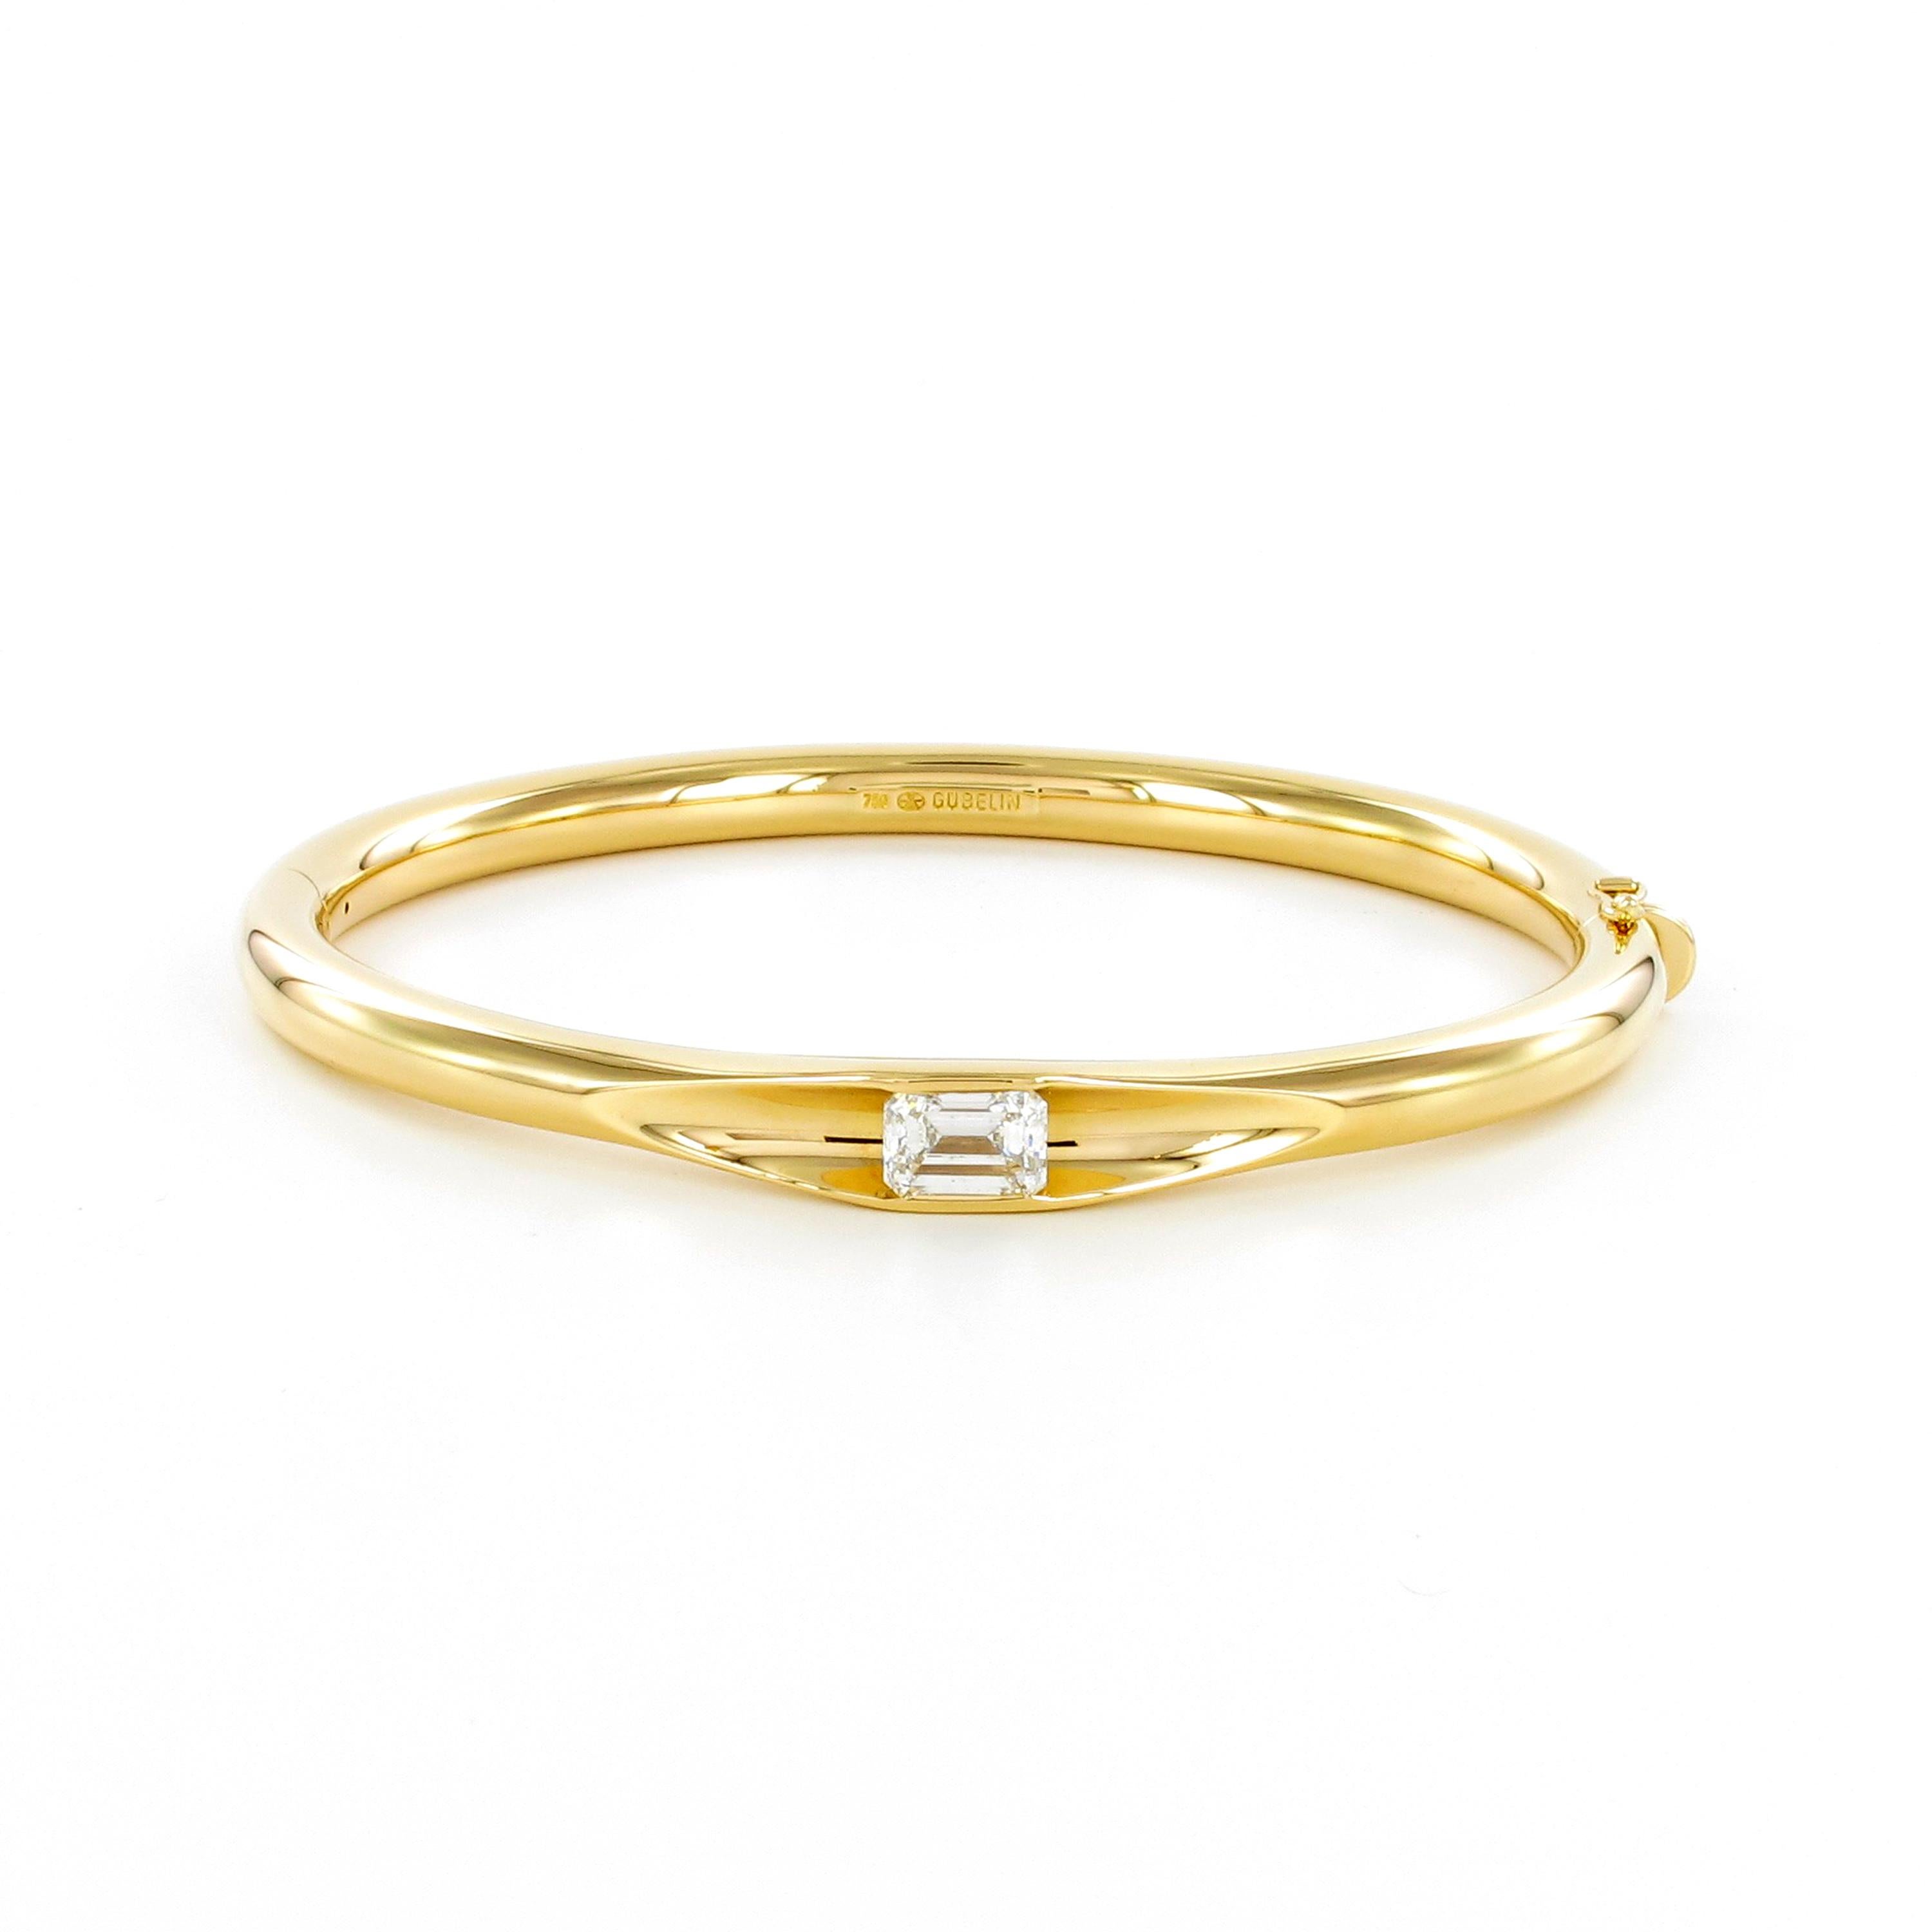 Superb 1.34 Ct Emerald-Cut Diamond Bangle by Gübelin in 18 Karat Yellow Gold In Excellent Condition For Sale In Lucerne, CH